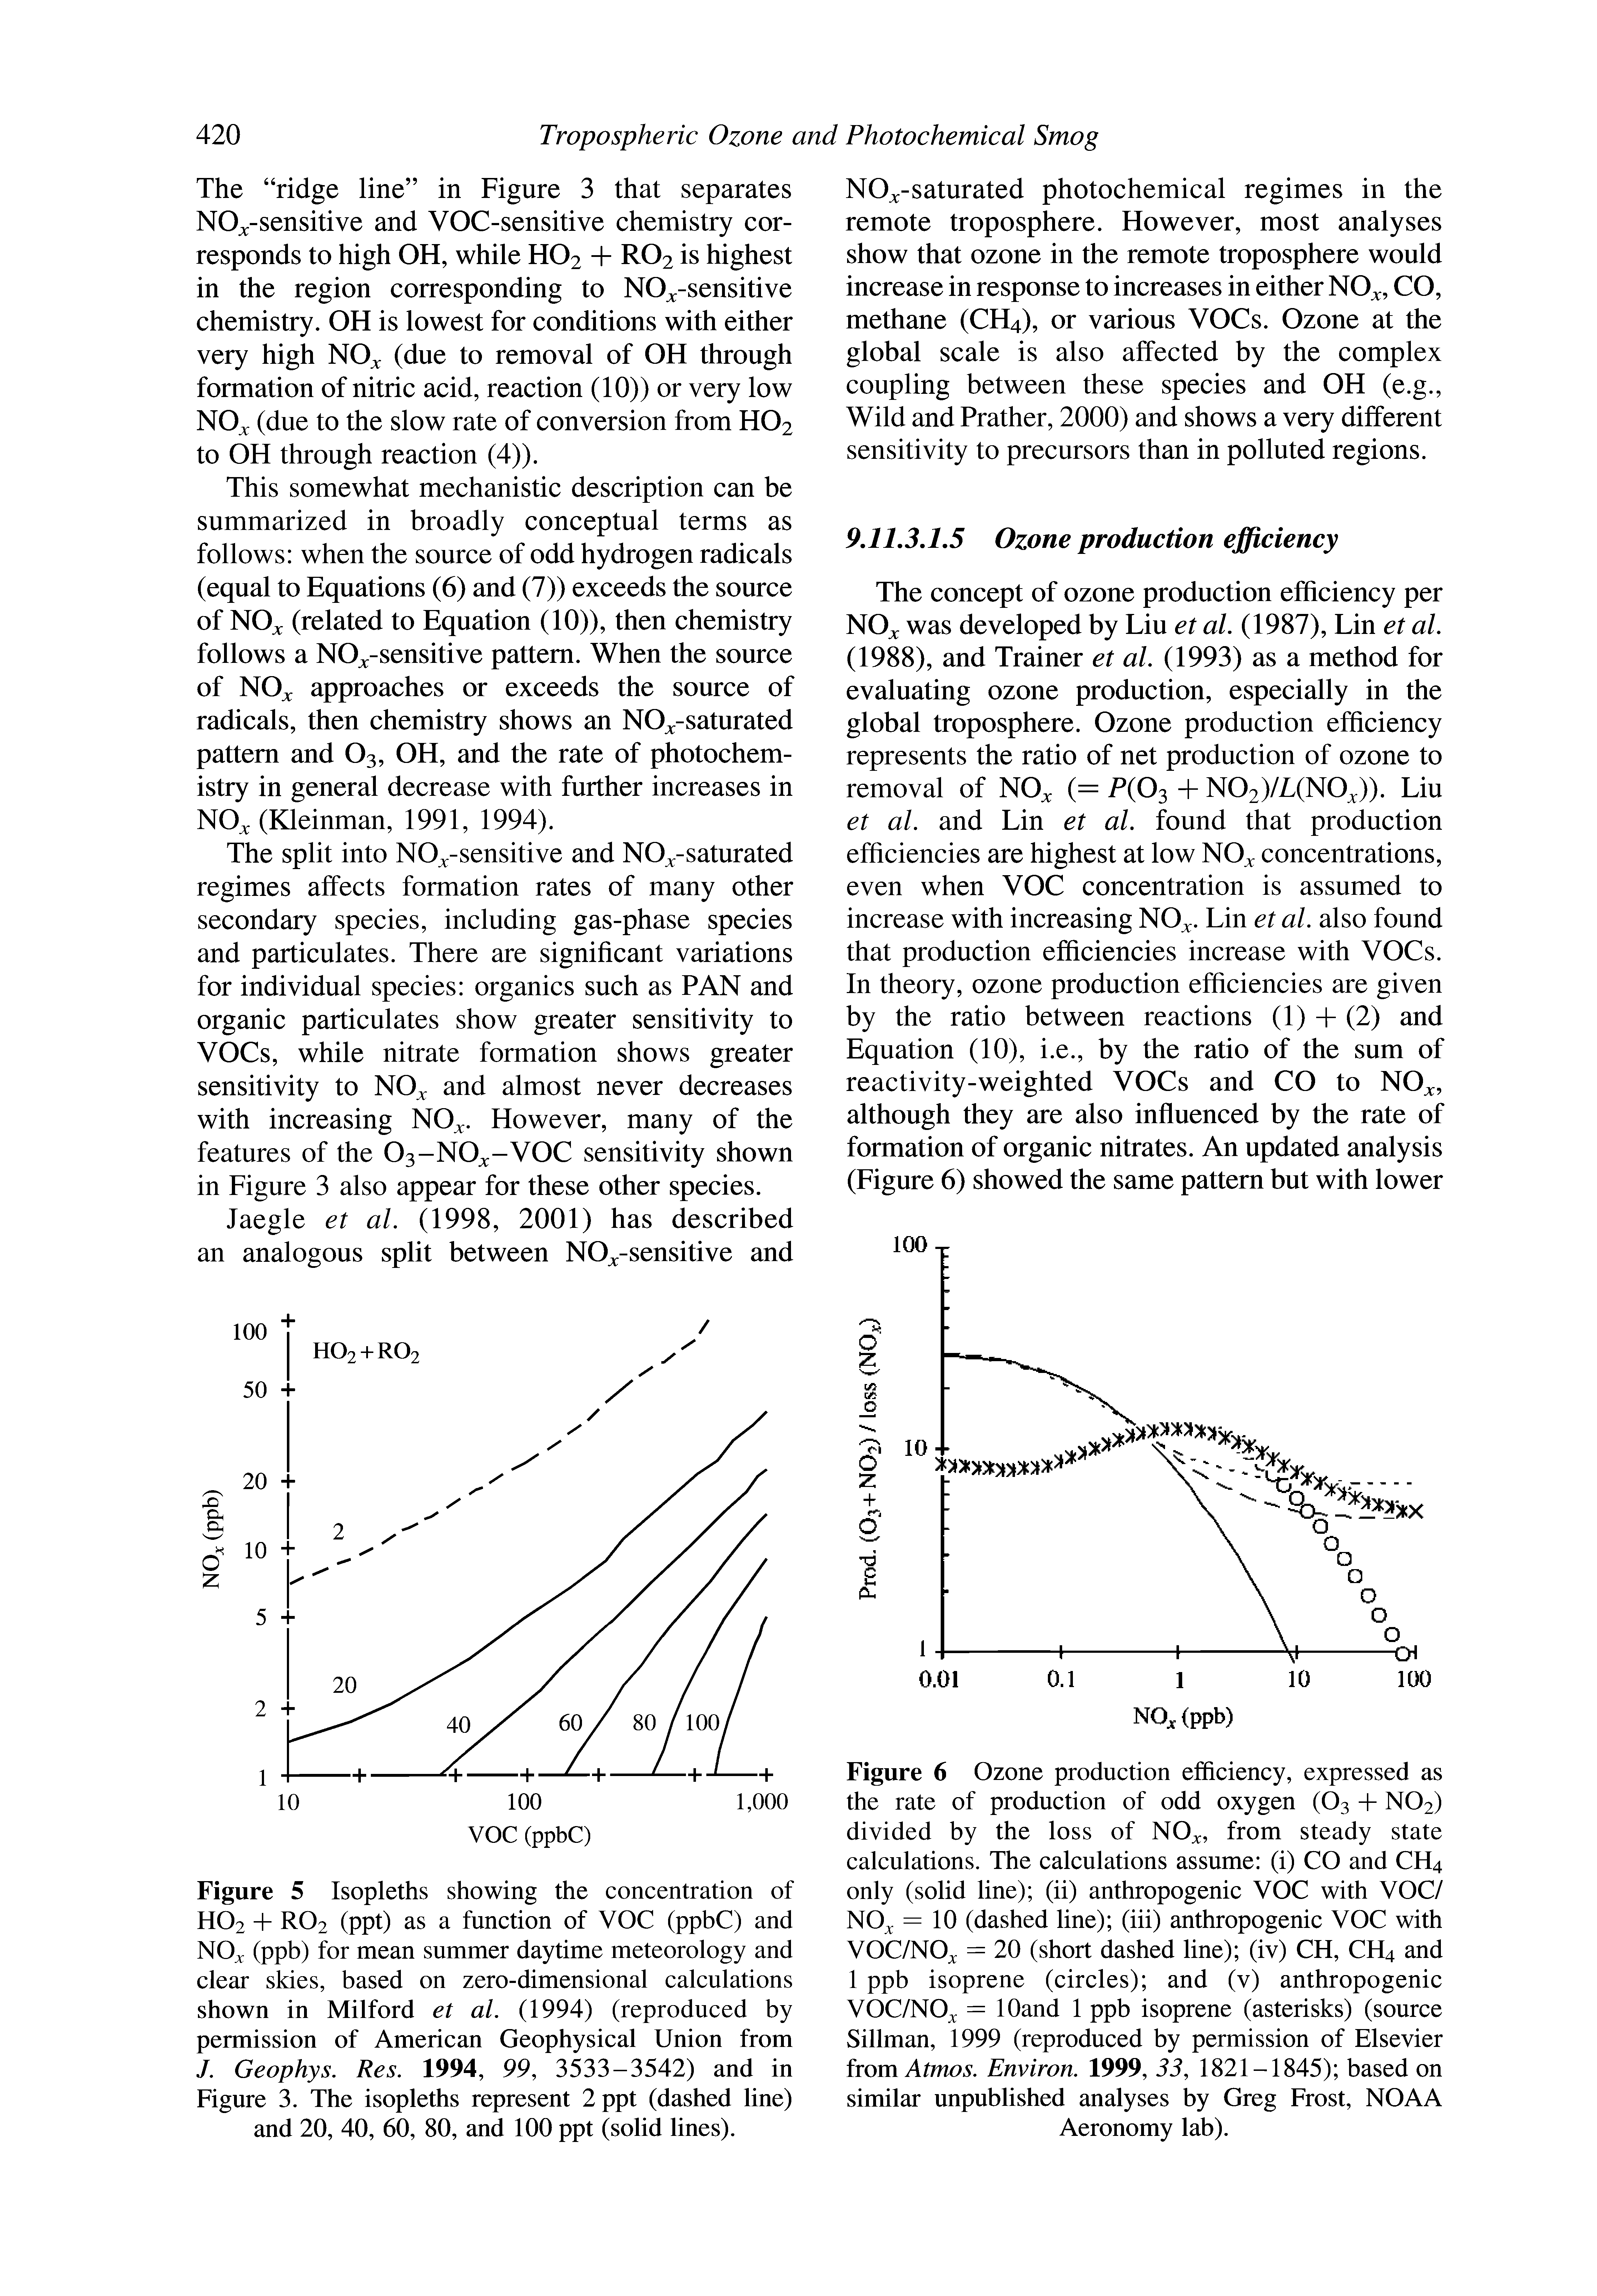 Figure 6 Ozone production efficiency, expressed as the rate of production of odd oxygen (O3 -h NO2) divided by the loss of NO . from steady state calculations. The calculations assume (i) CO and CH4 only (solid line) (ii) anthropogenic VOC with VOC/ NO = 10 (dashed line) (iii) anthropogenic VOC with VOC/NO c = 20 (short dashed line) (iv) CH, CH4 and 1 ppb isoprene (circles) and (v) anthropogenic VOC/NO = lOand 1 ppb isoprene (asterisks) (source Sillman, 1999 (reproduced by permission of Elsevier from Atmos. Environ. 1999, 33, 1821-1845) based on similar unpublished analyses by Greg Frost, NOAA Aeronomy lab).